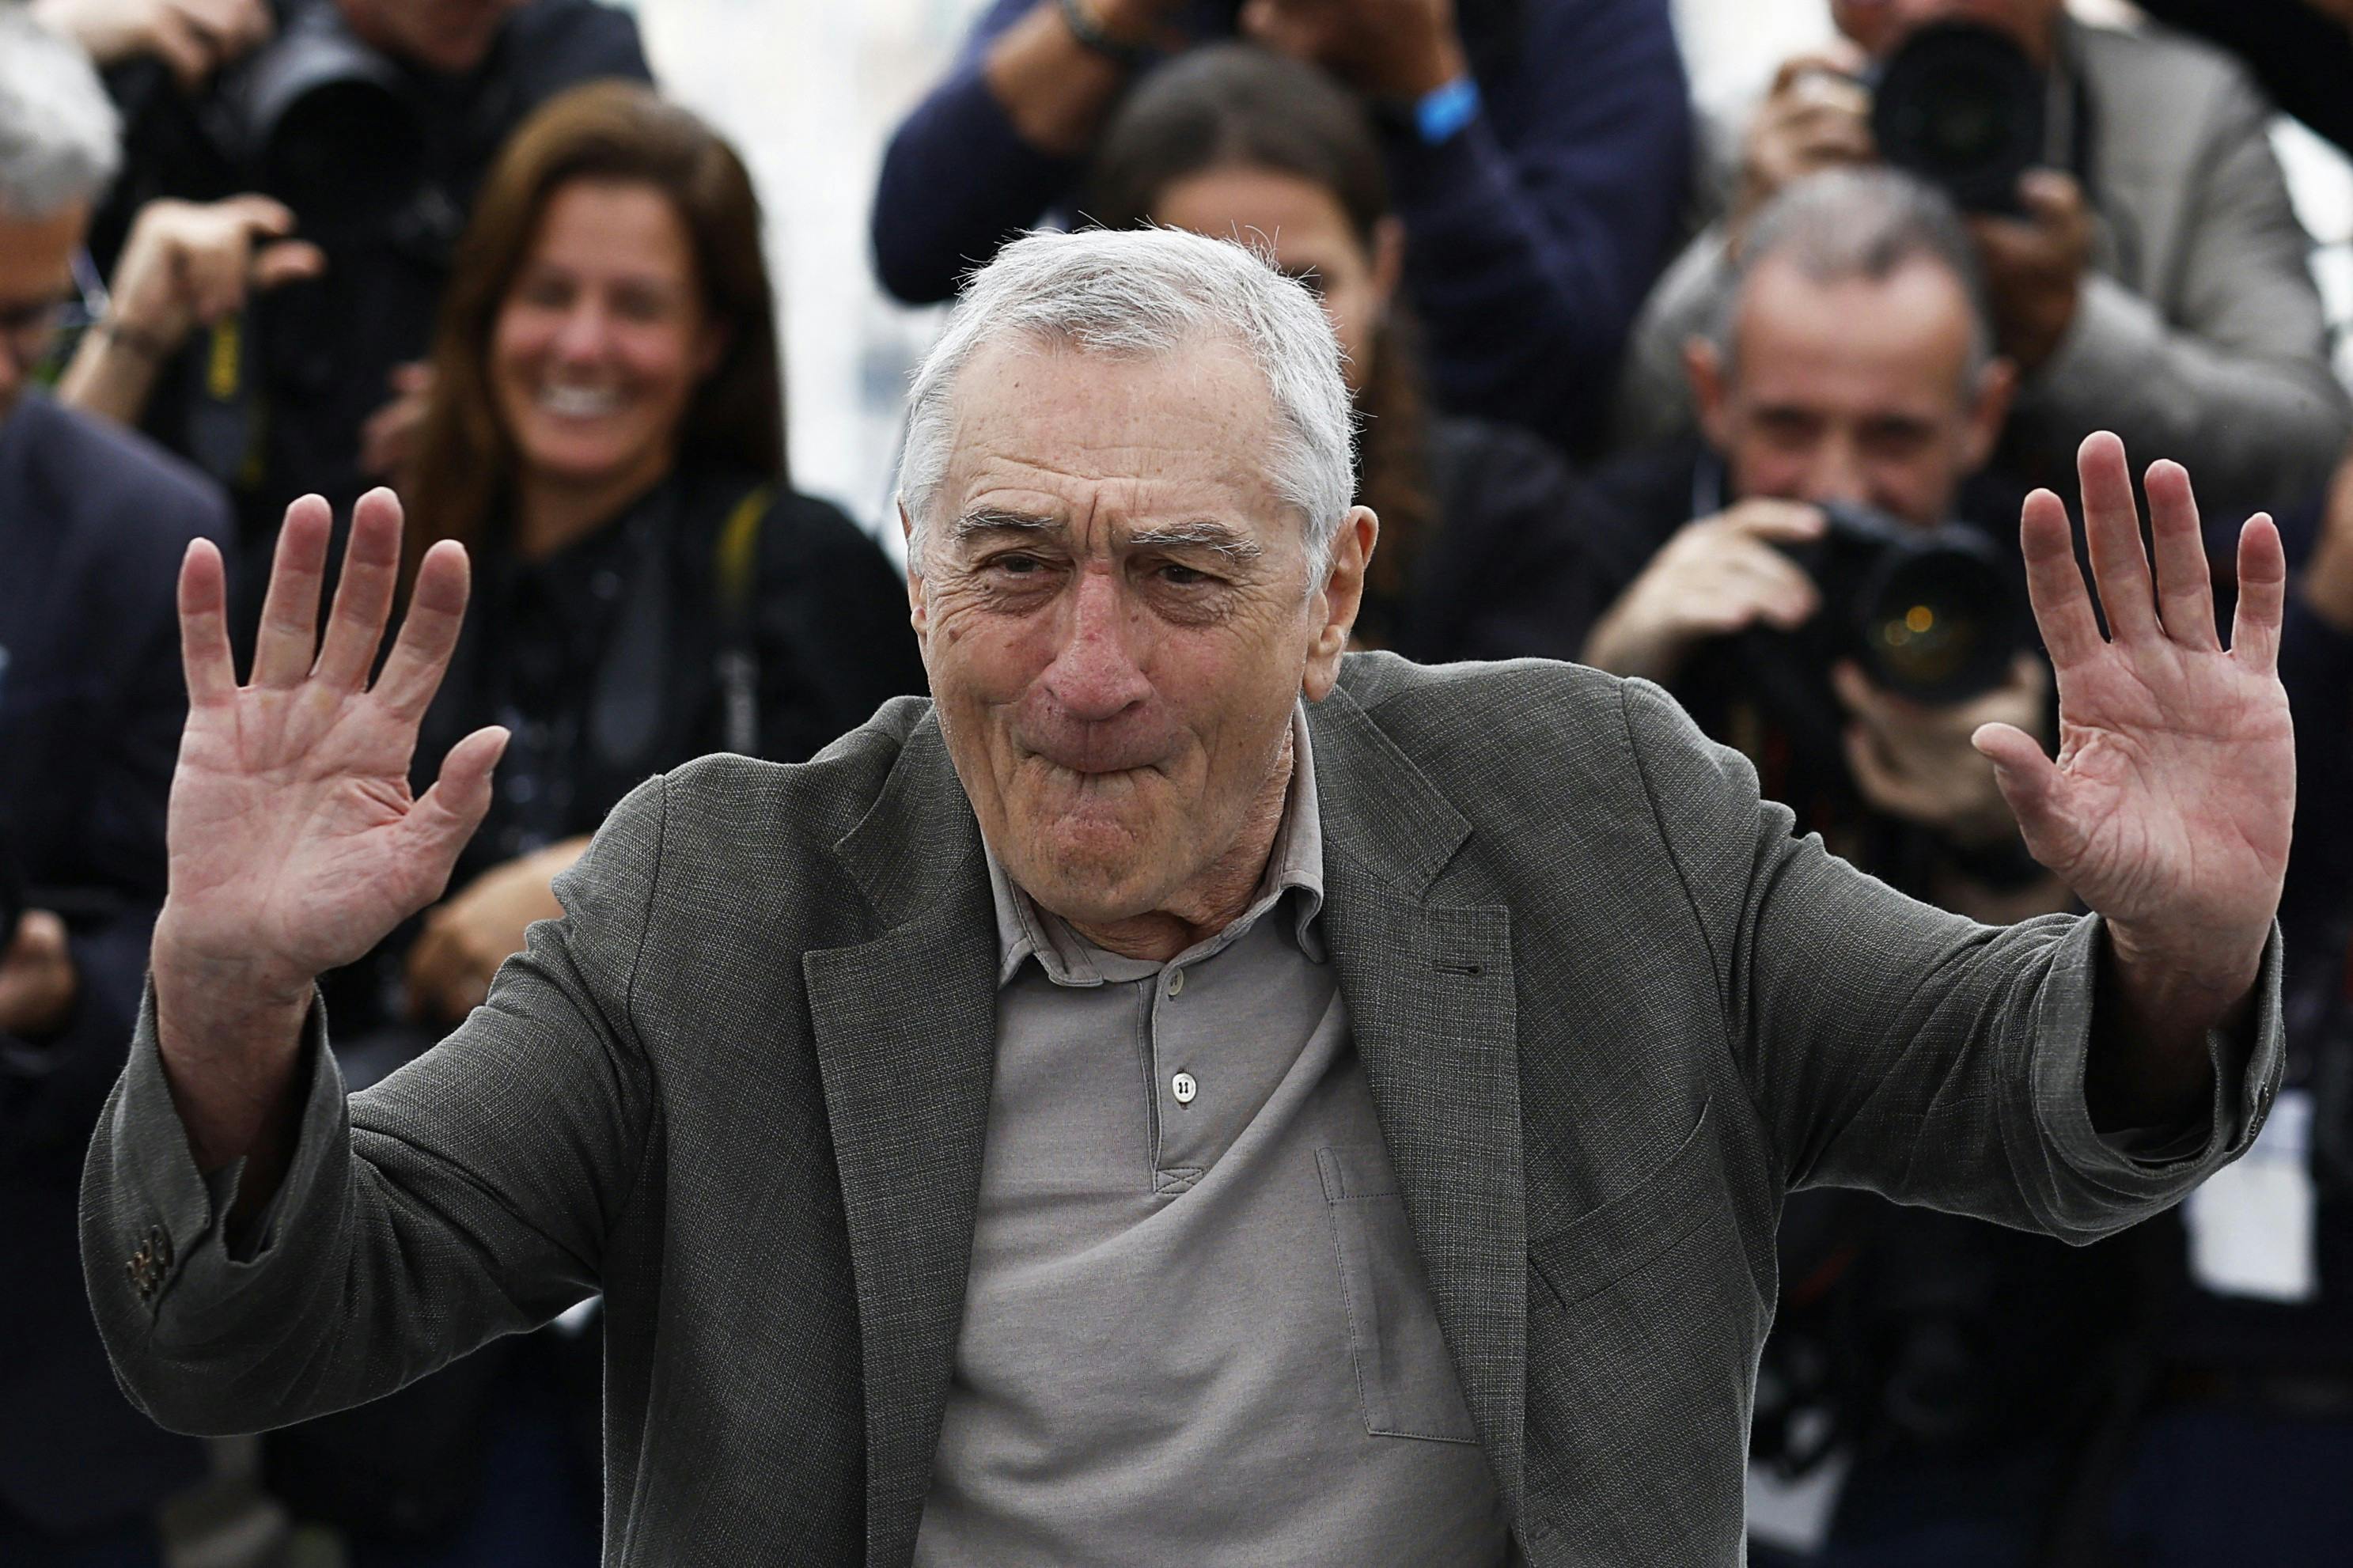 The 76th Cannes Film Festival - Photocall for the film 'Killers of the Flower Moon' Out of Competition - Cannes, France, May 21, 2023. Cast member Robert De Niro poses. REUTERS/Gonzalo Fuentes